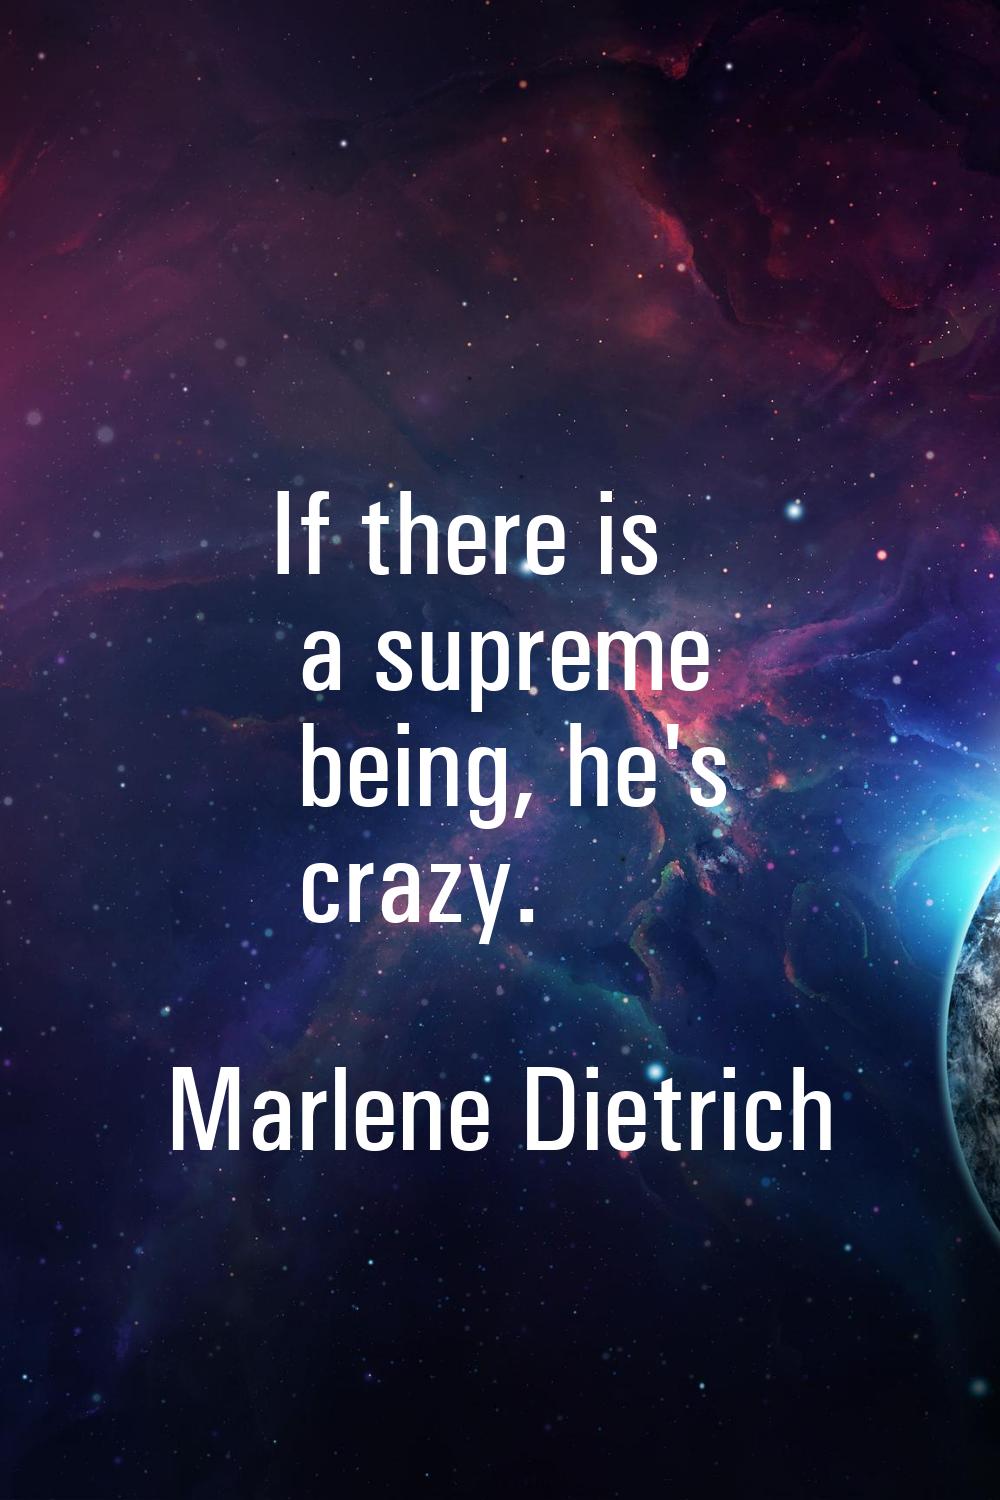 If there is a supreme being, he's crazy.